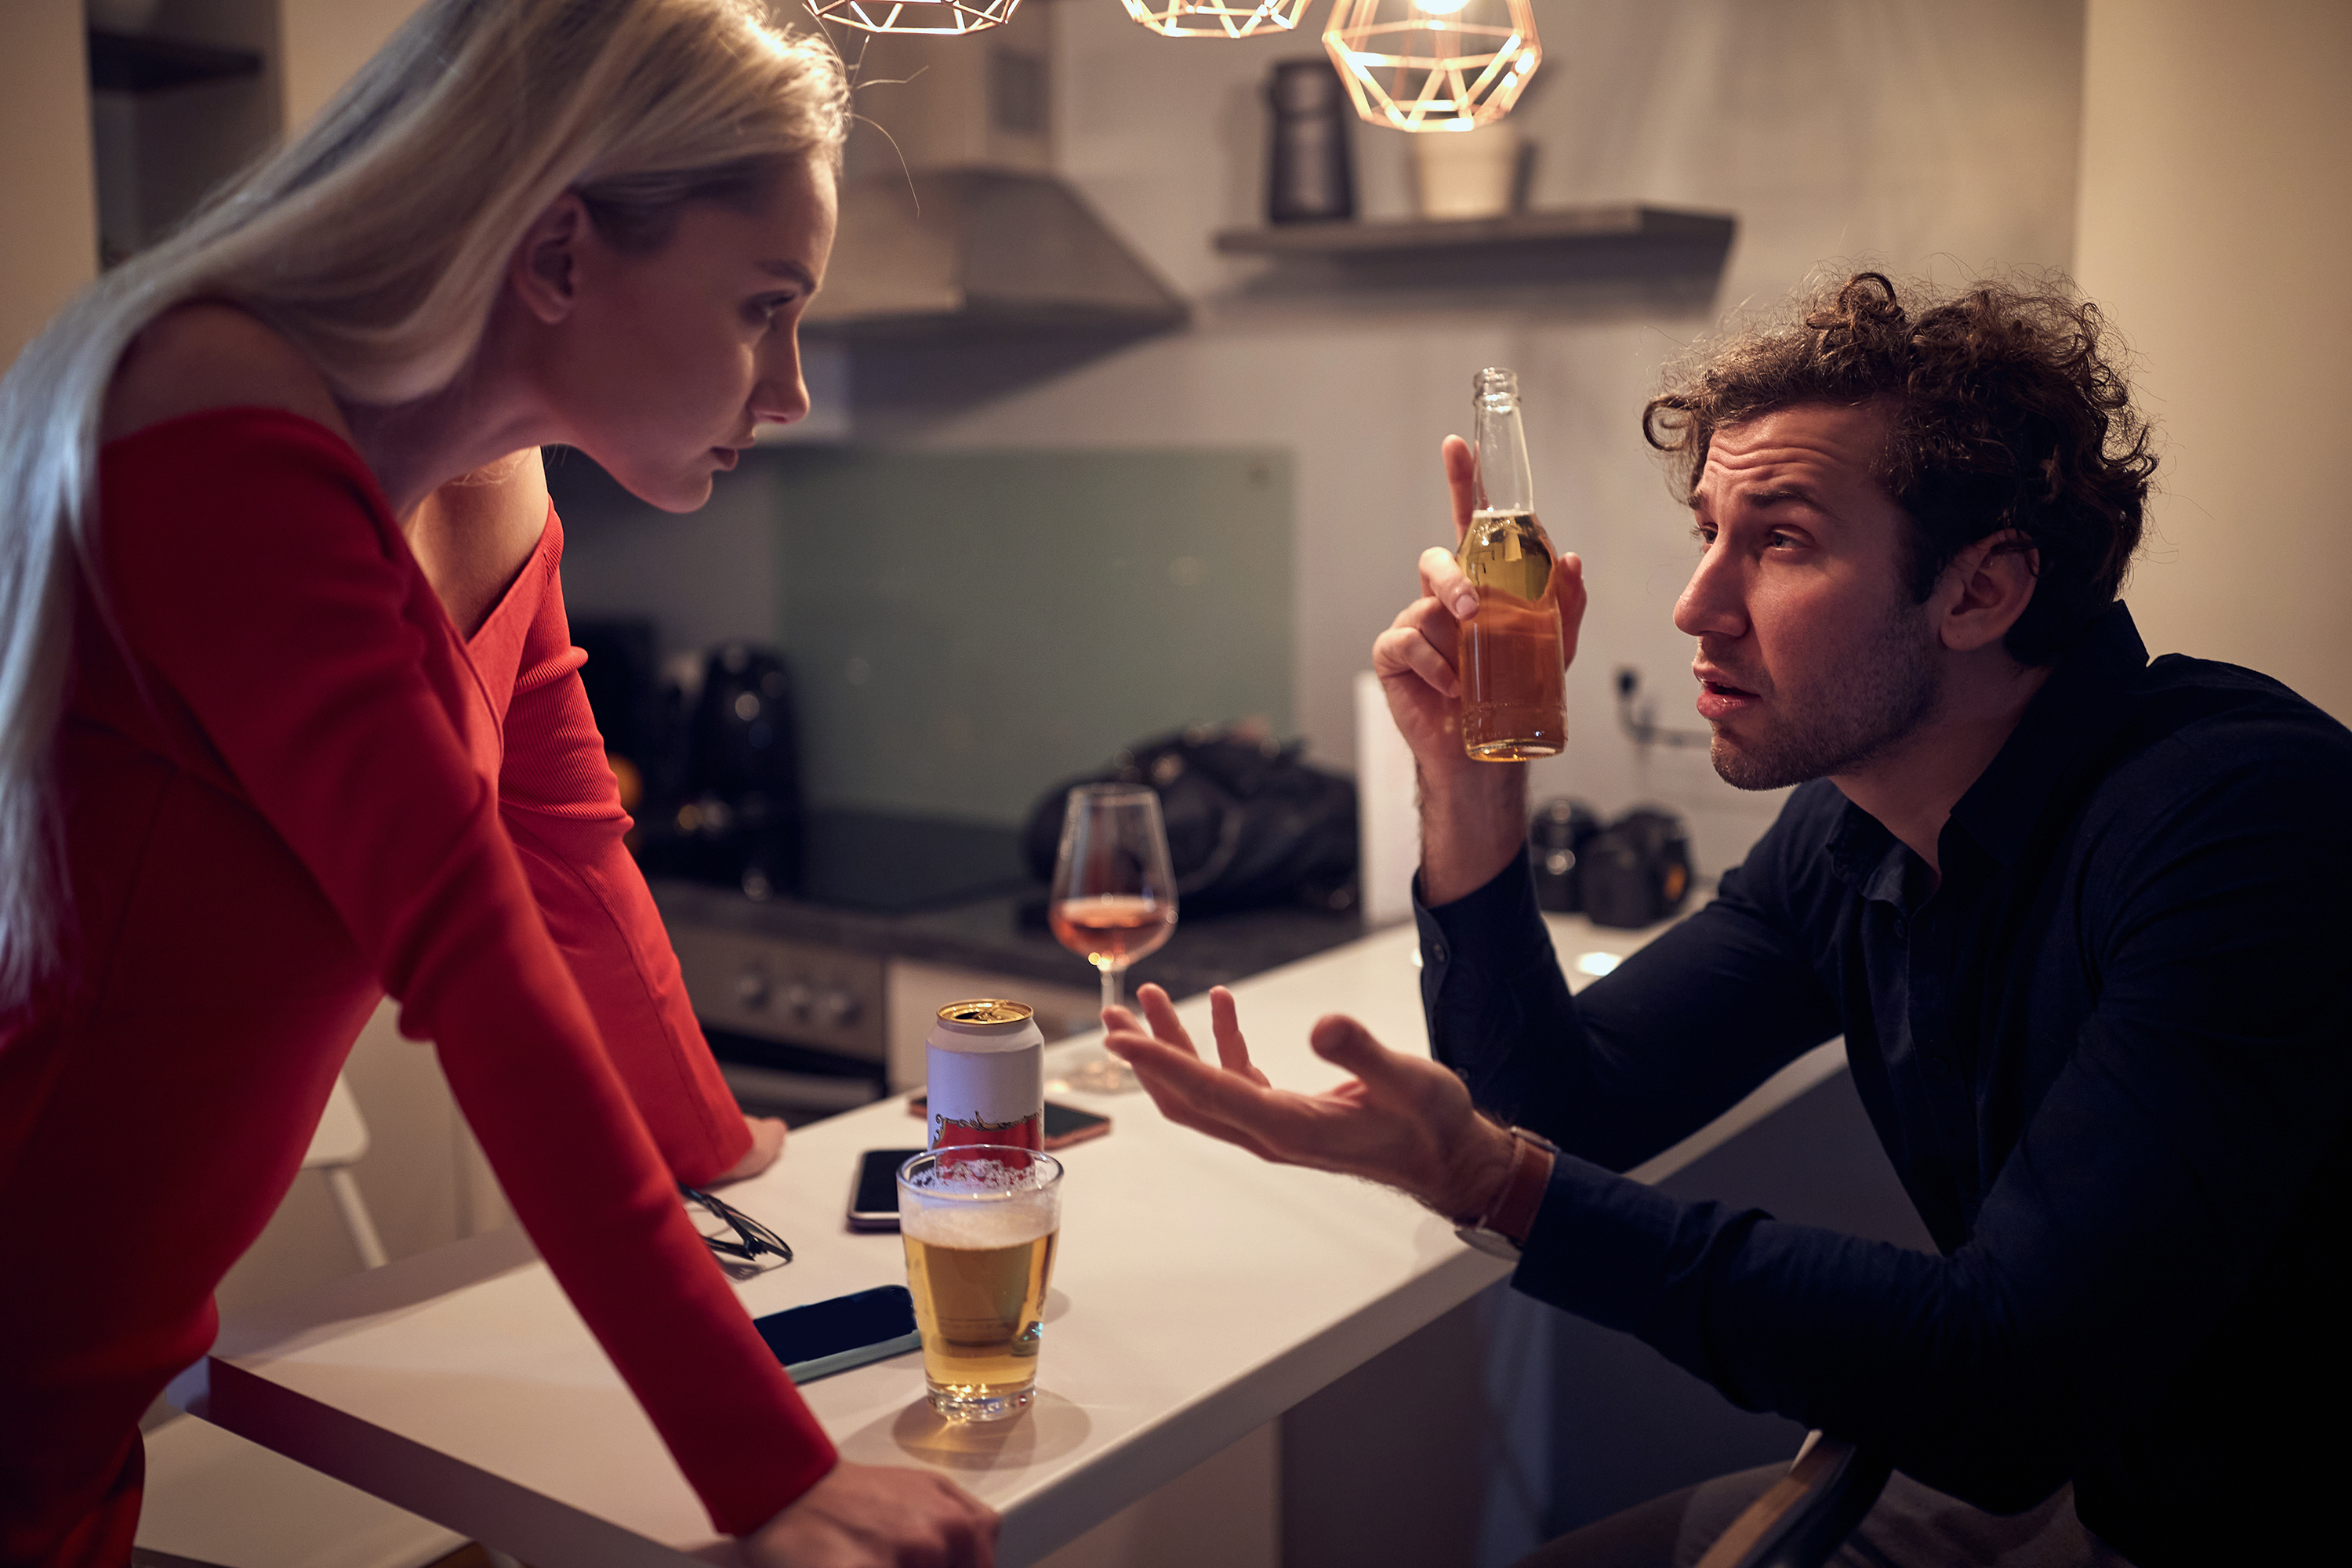 Drunk Extreme Porn - Porn Addiction: Causes, Signs, Treatments, and More